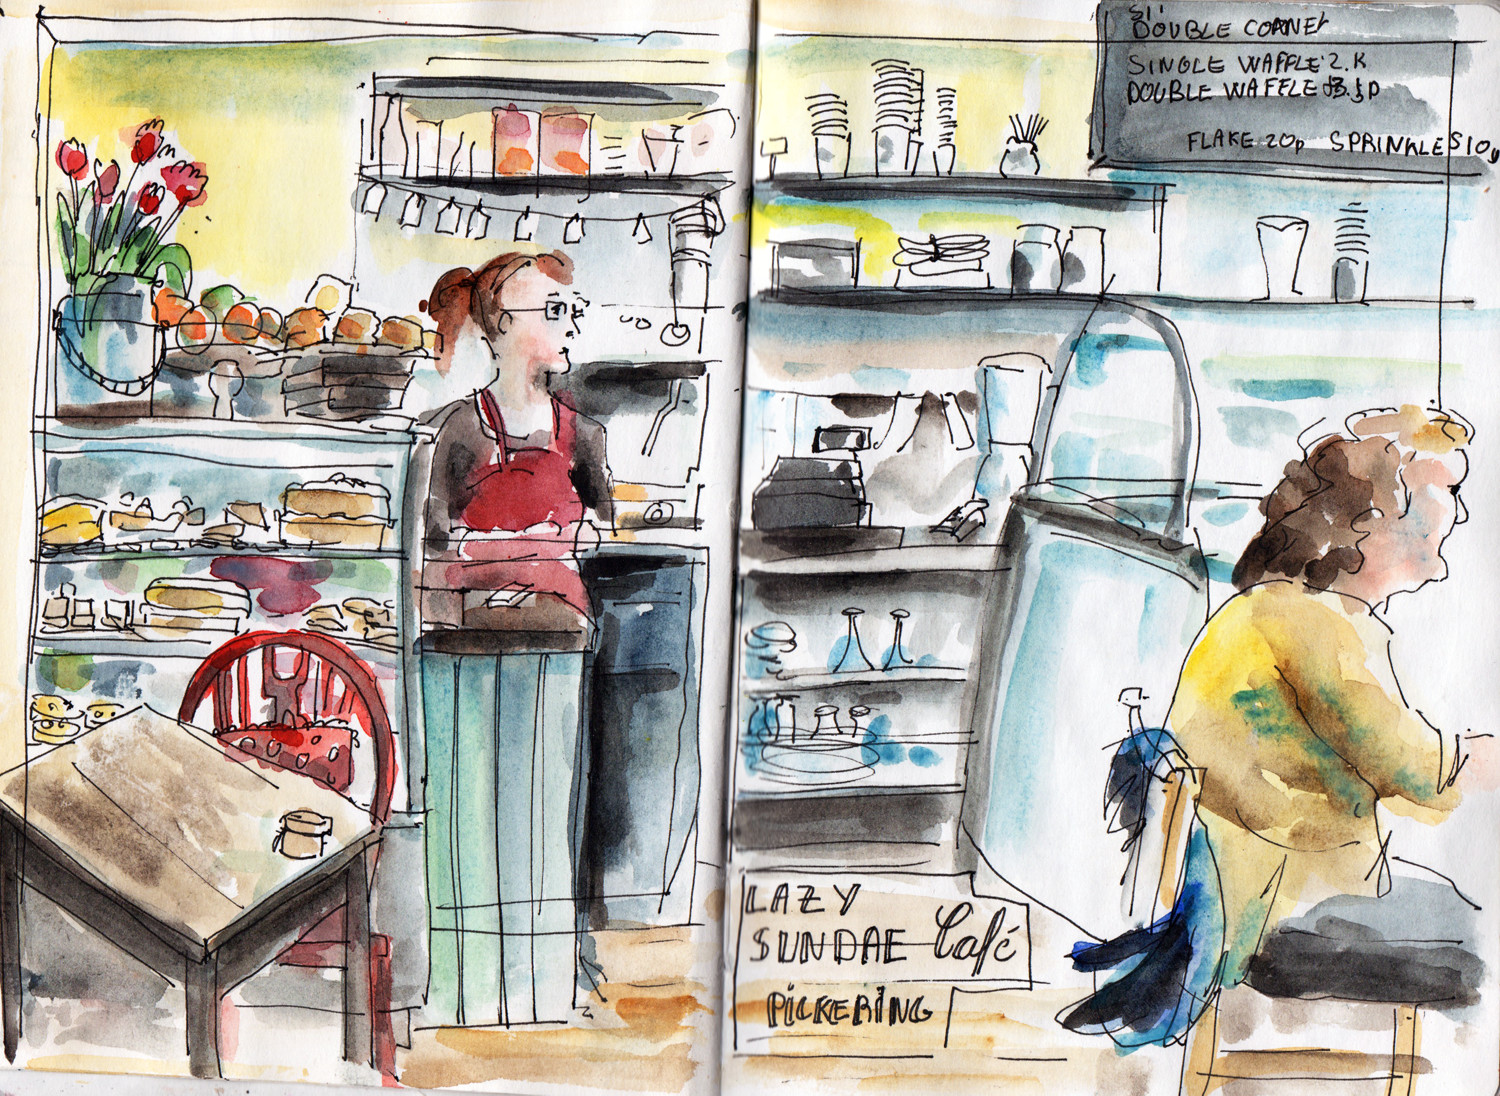 Lazy Sunday Cafe - Sketch in pen and watercolour by Sophie Peanut